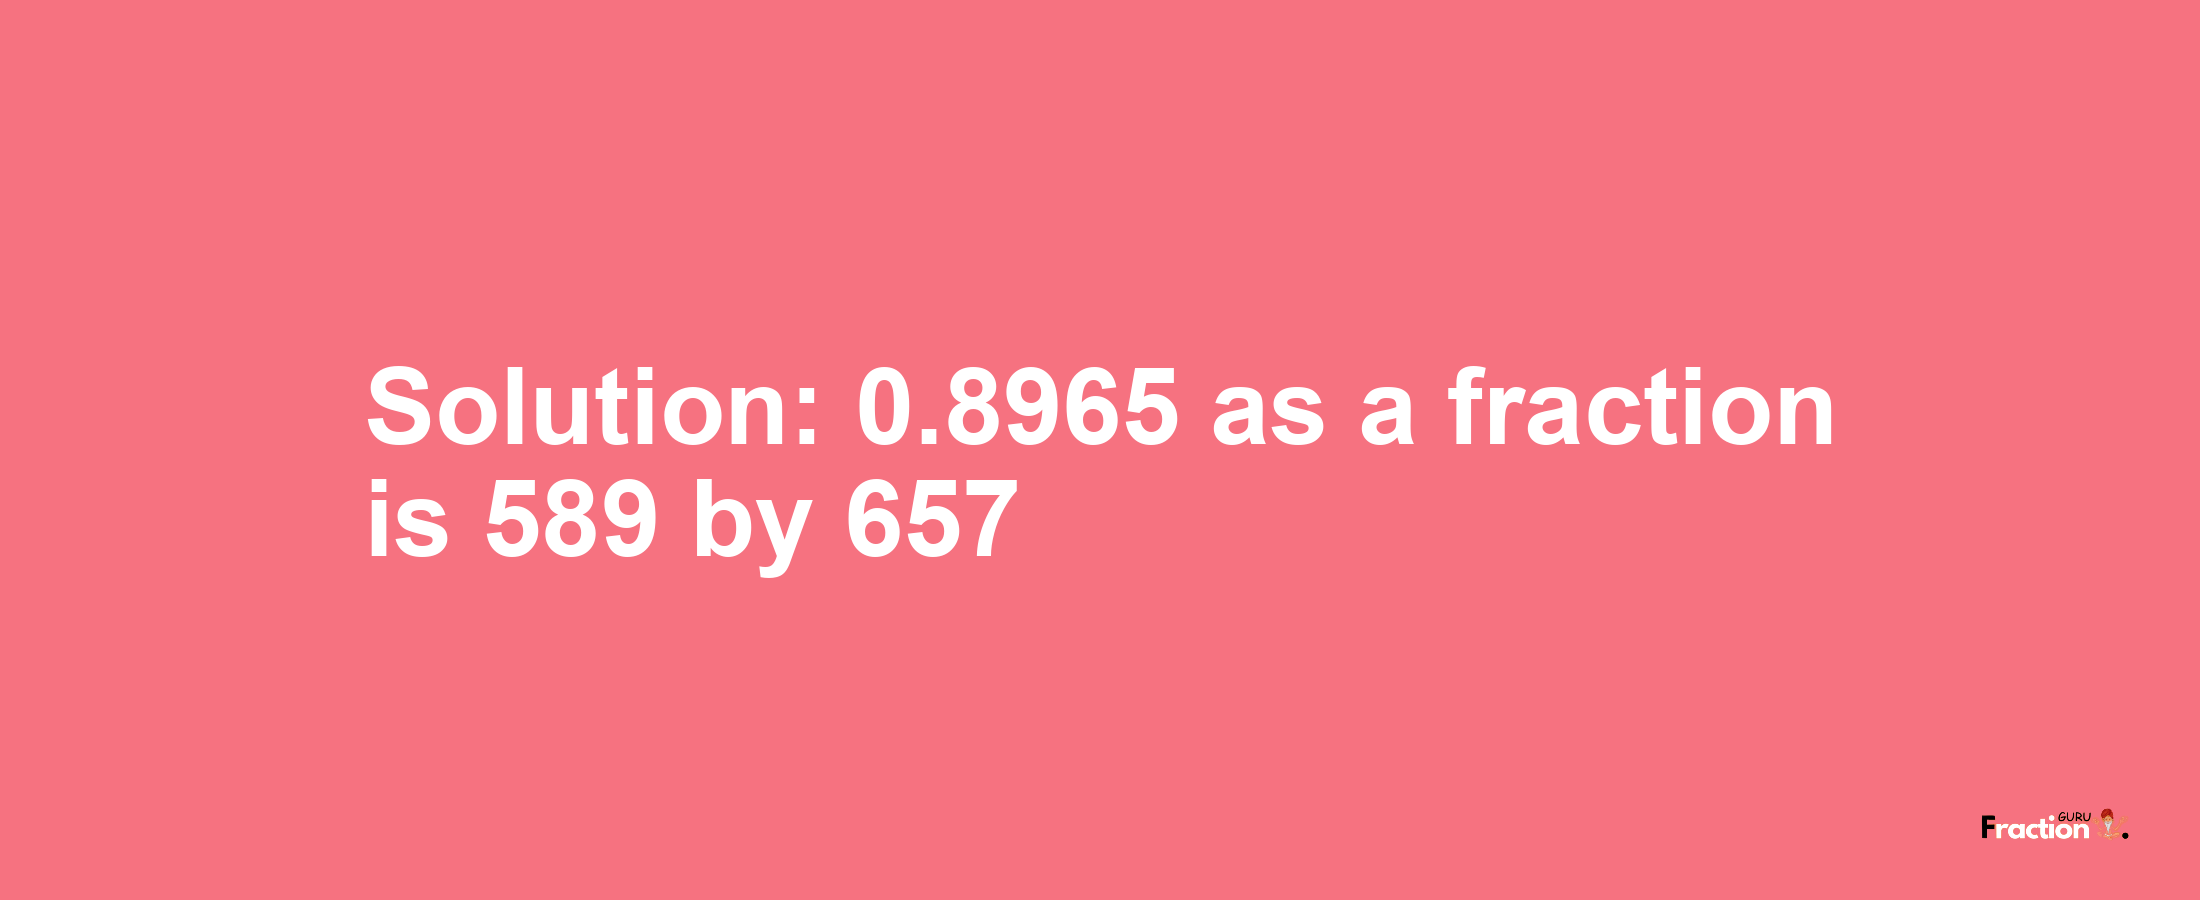 Solution:0.8965 as a fraction is 589/657